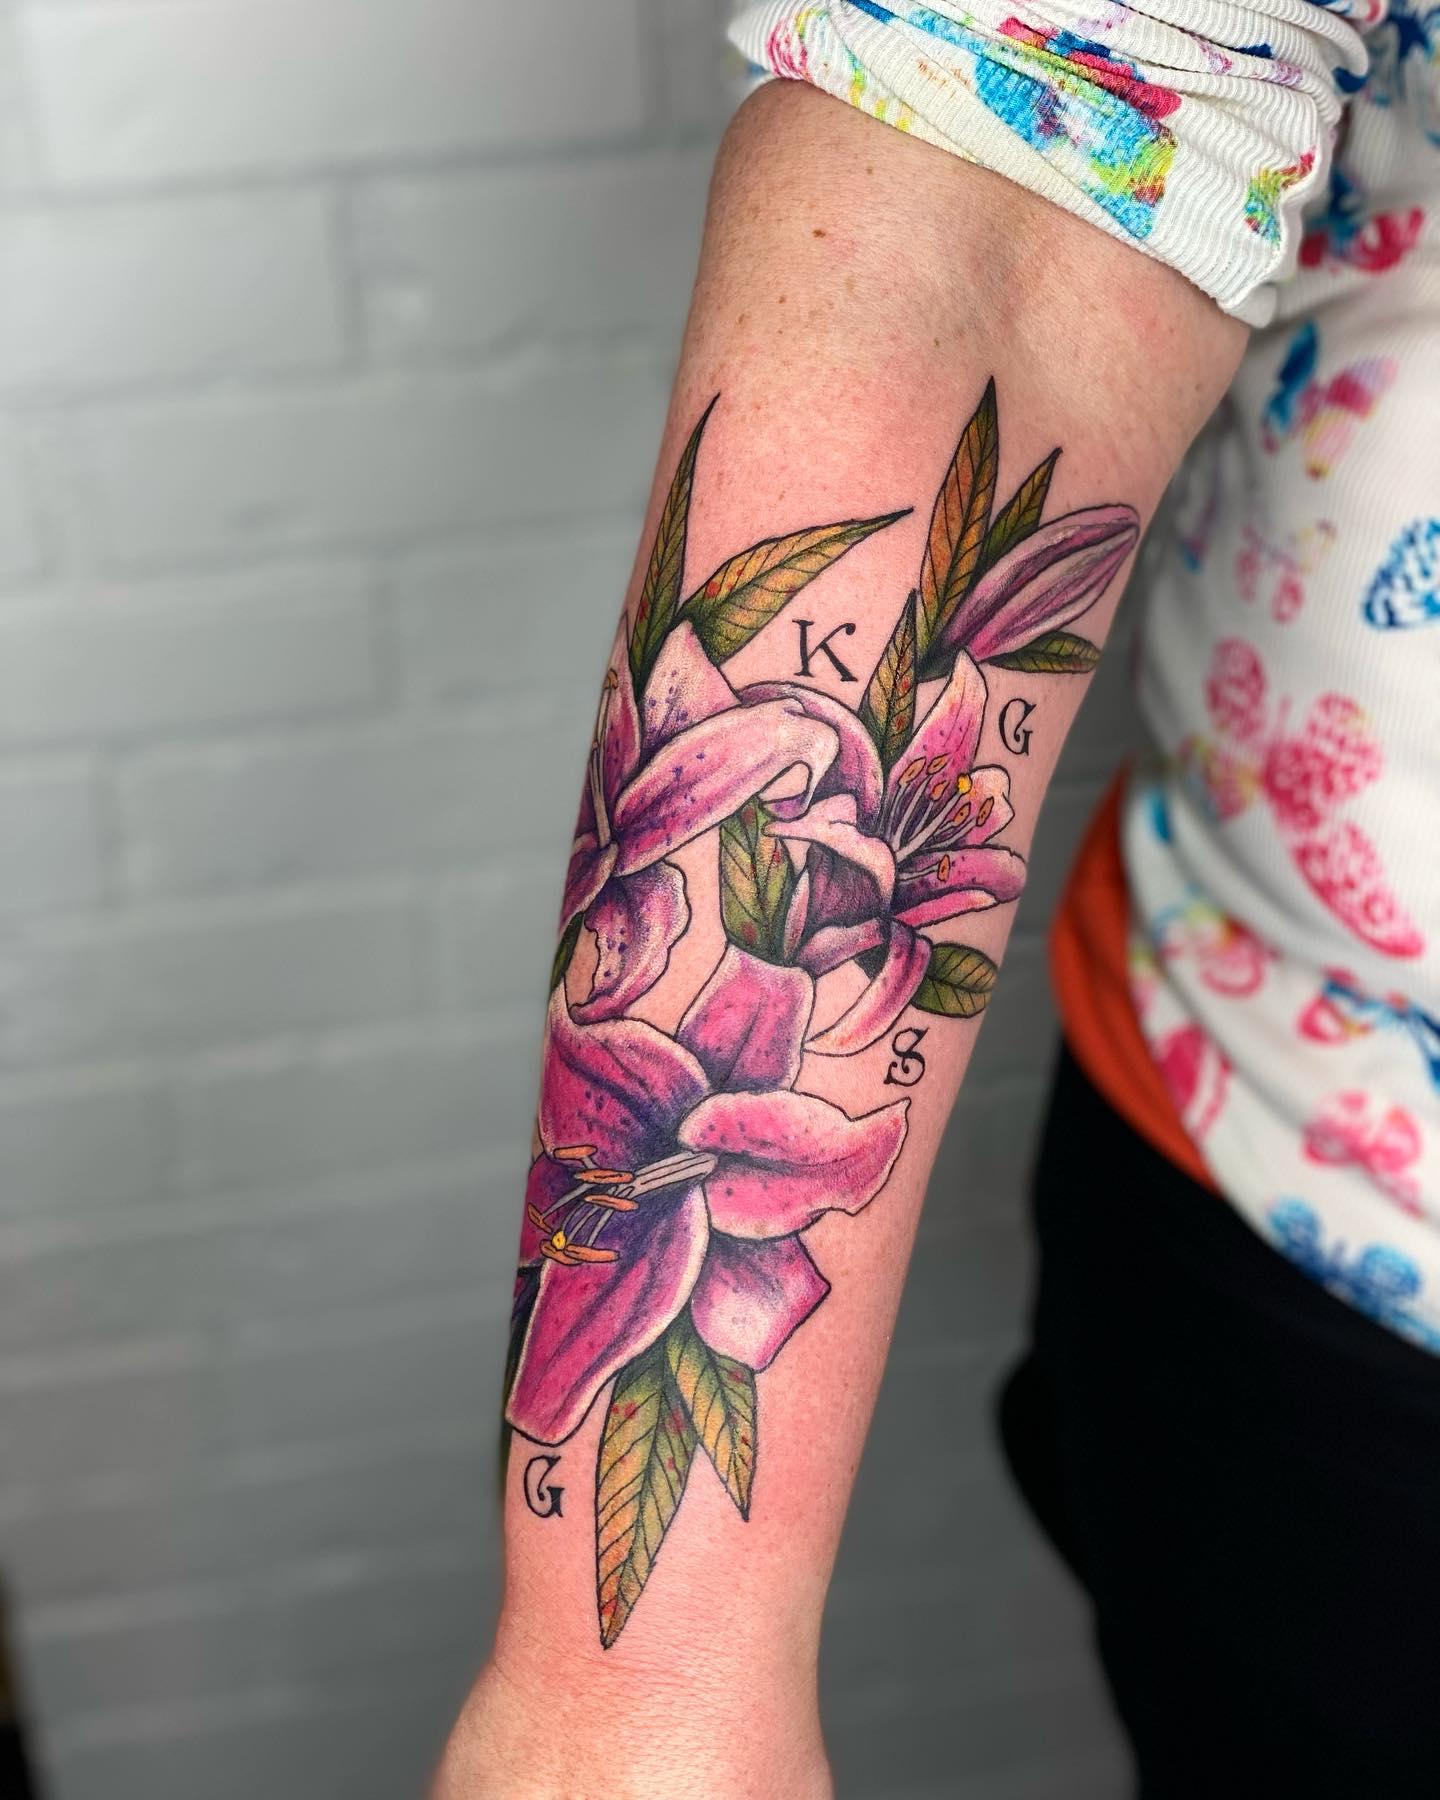 The pink lily is a flower that symbolizes faithfulness and purity. A pink lily tattoo can be used by people who want to convey their love for another person, even if they're not married or engaged yet. If you want to convey this message, go for this tattoo with green leaves.